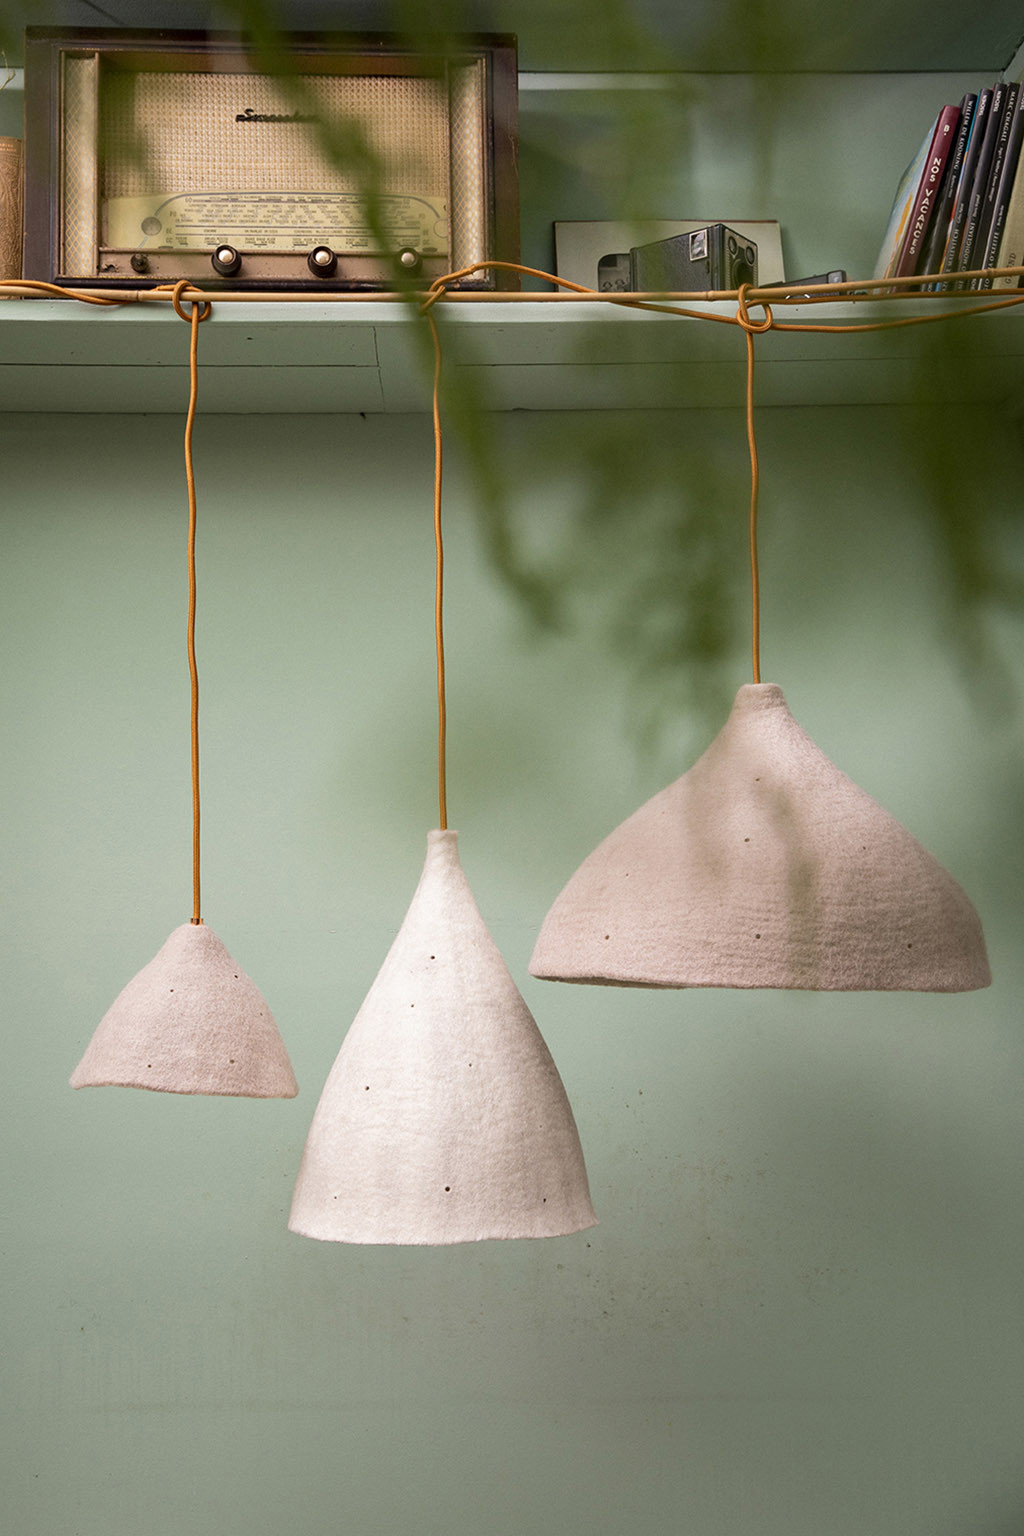 Shades of pink for these handmade boiled wool lampshades